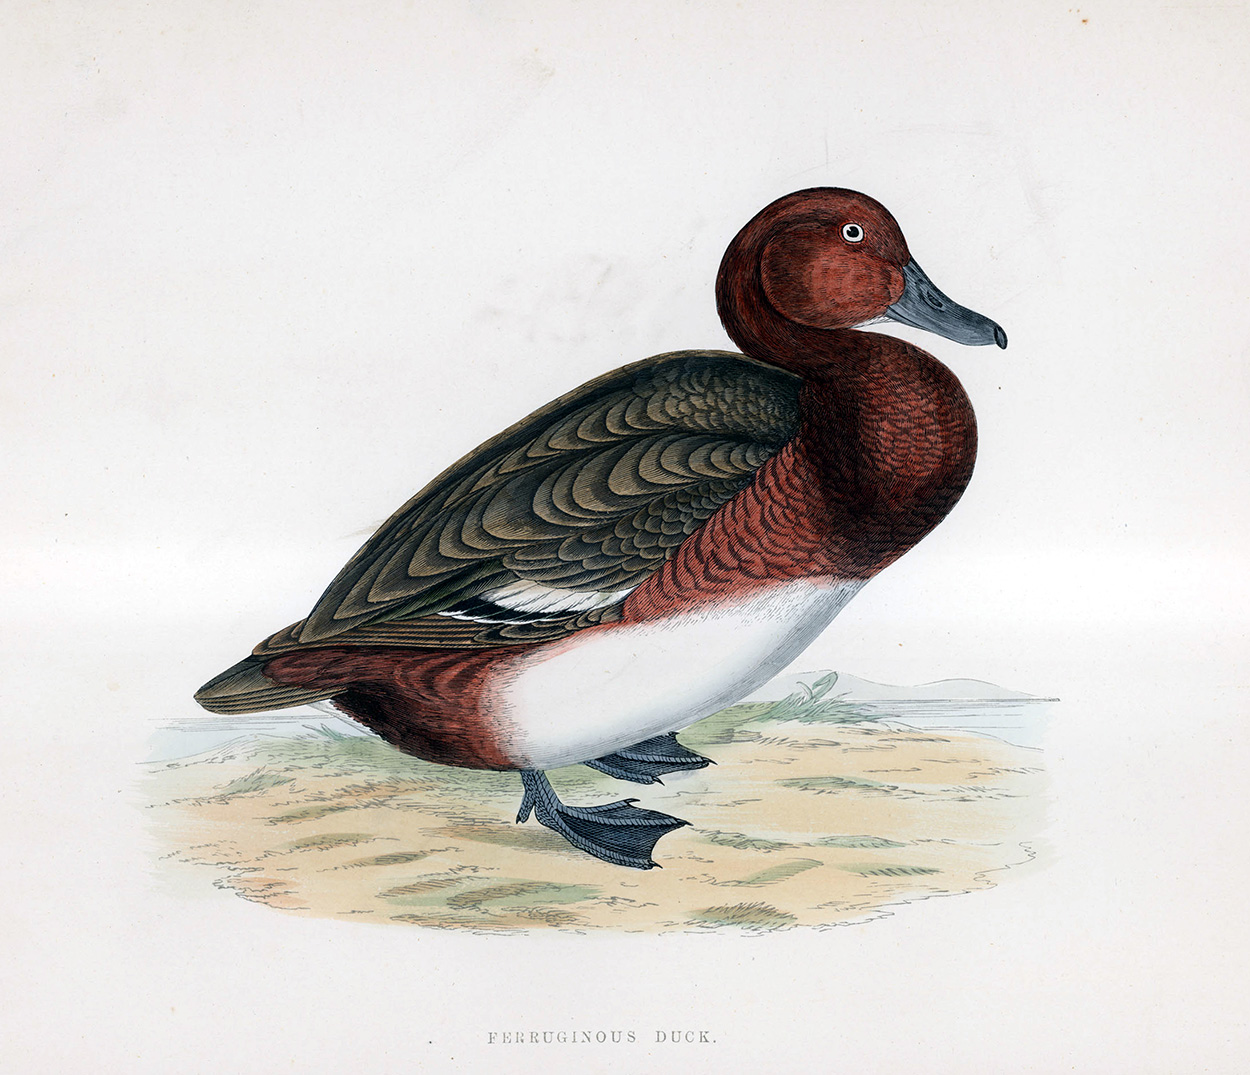 Ferruginos Duck - hand coloured lithograph 1891 (Print) art by Beverley R Morris at The Illustration Art Gallery